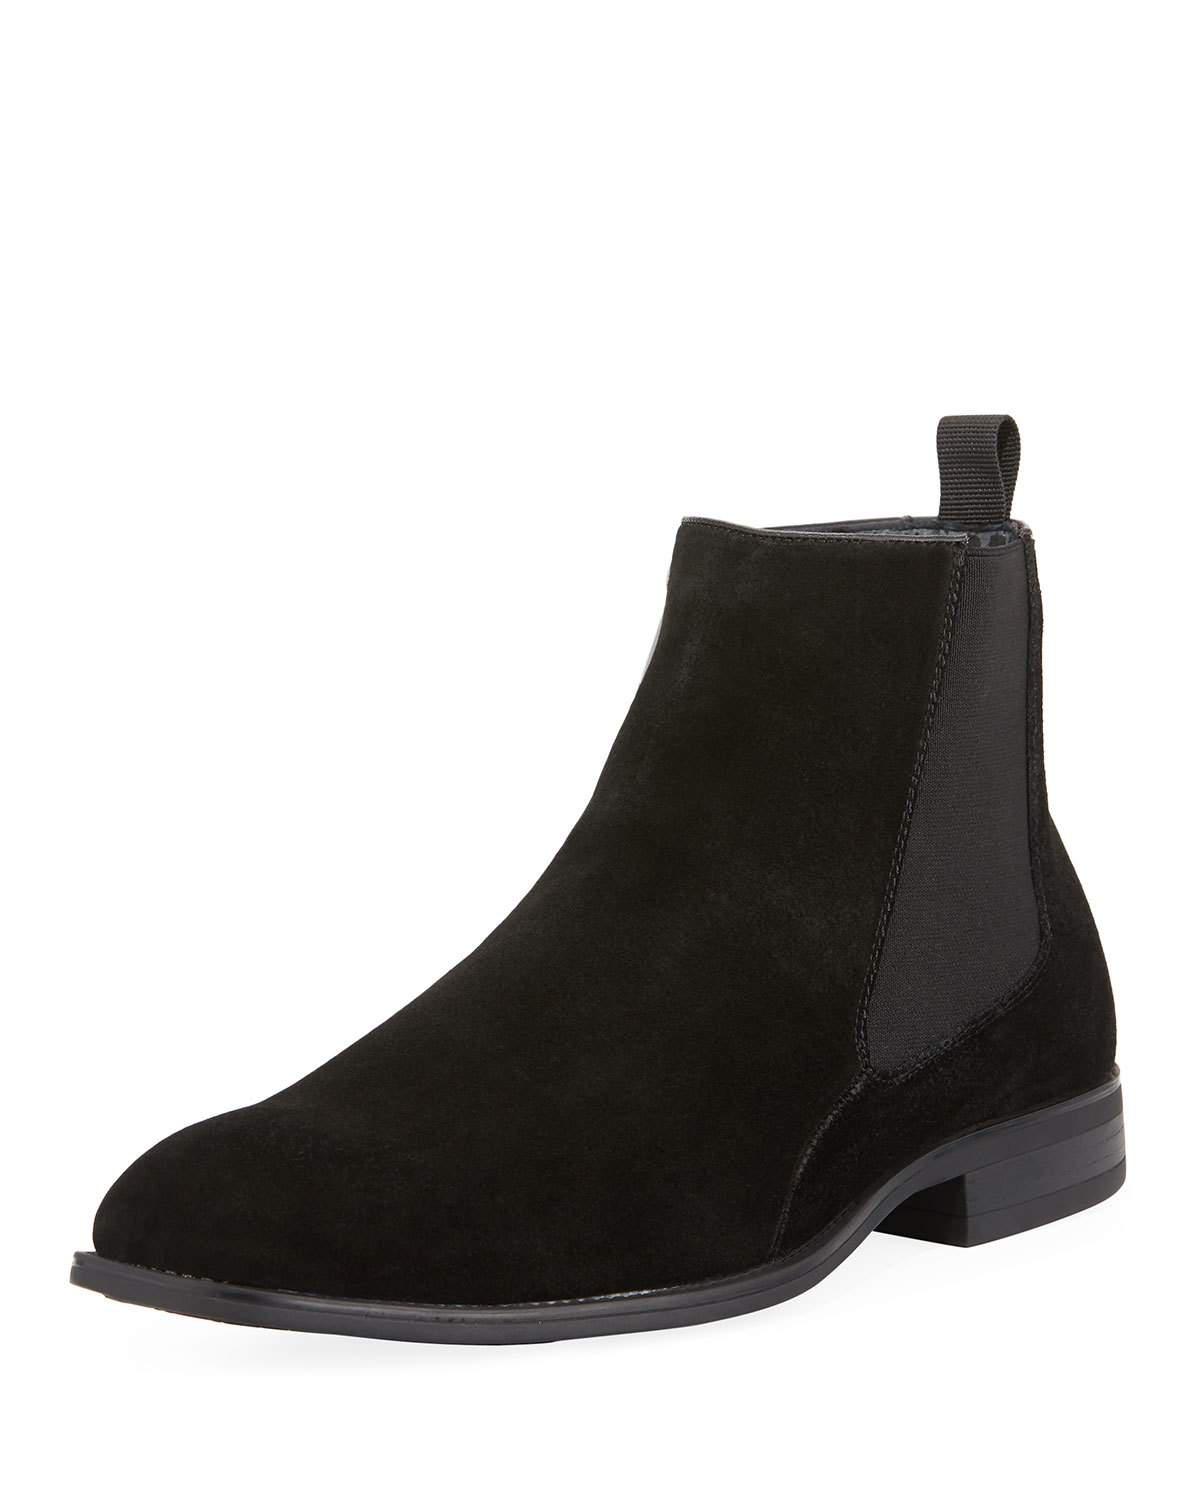 Karl Lagerfeld Men's Suede Chelsea Ankle Boots in Black for Men - Lyst